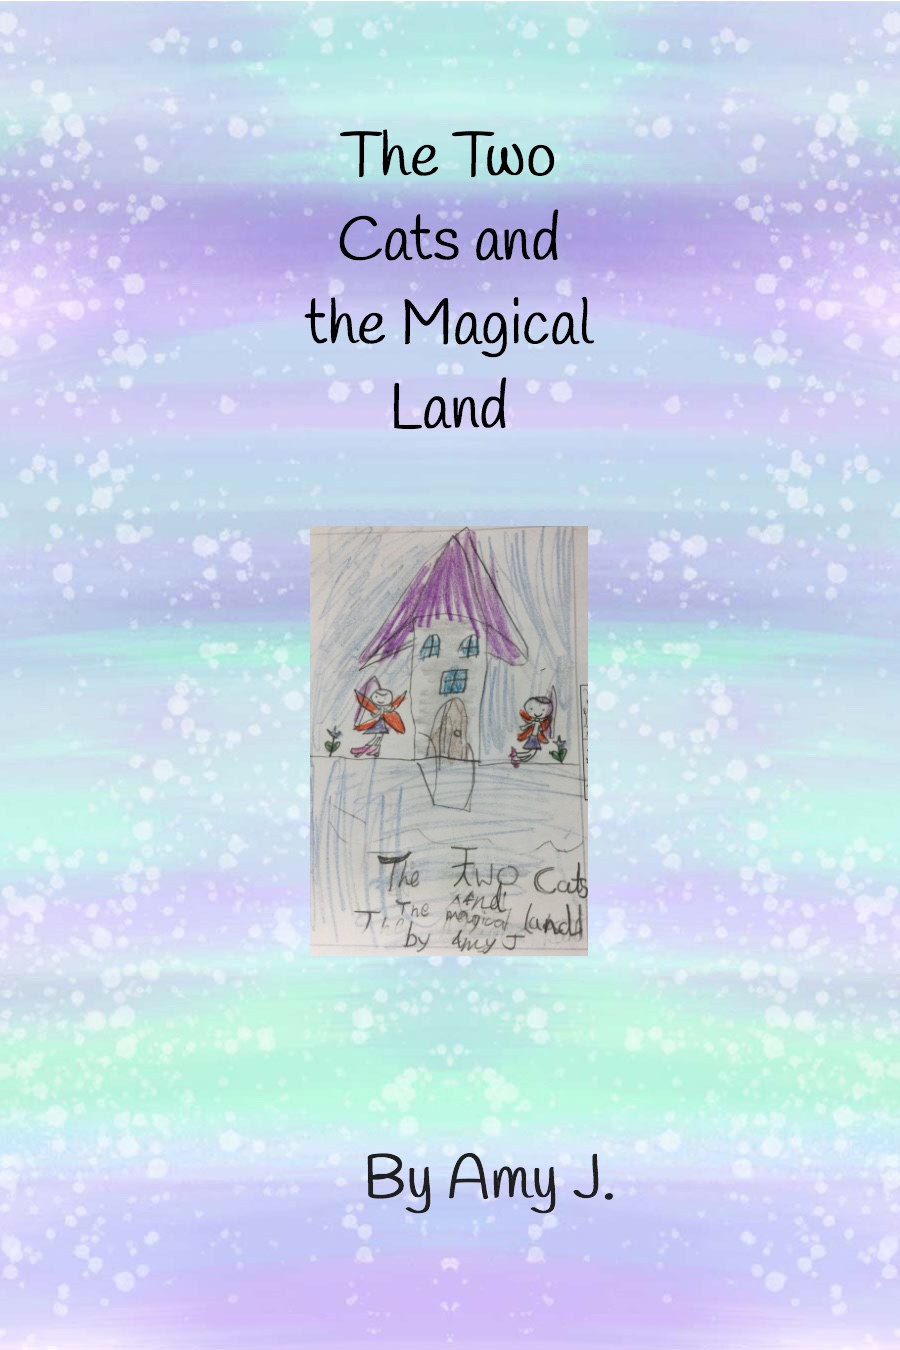 The Two Cats and the Magical Land by Amy J